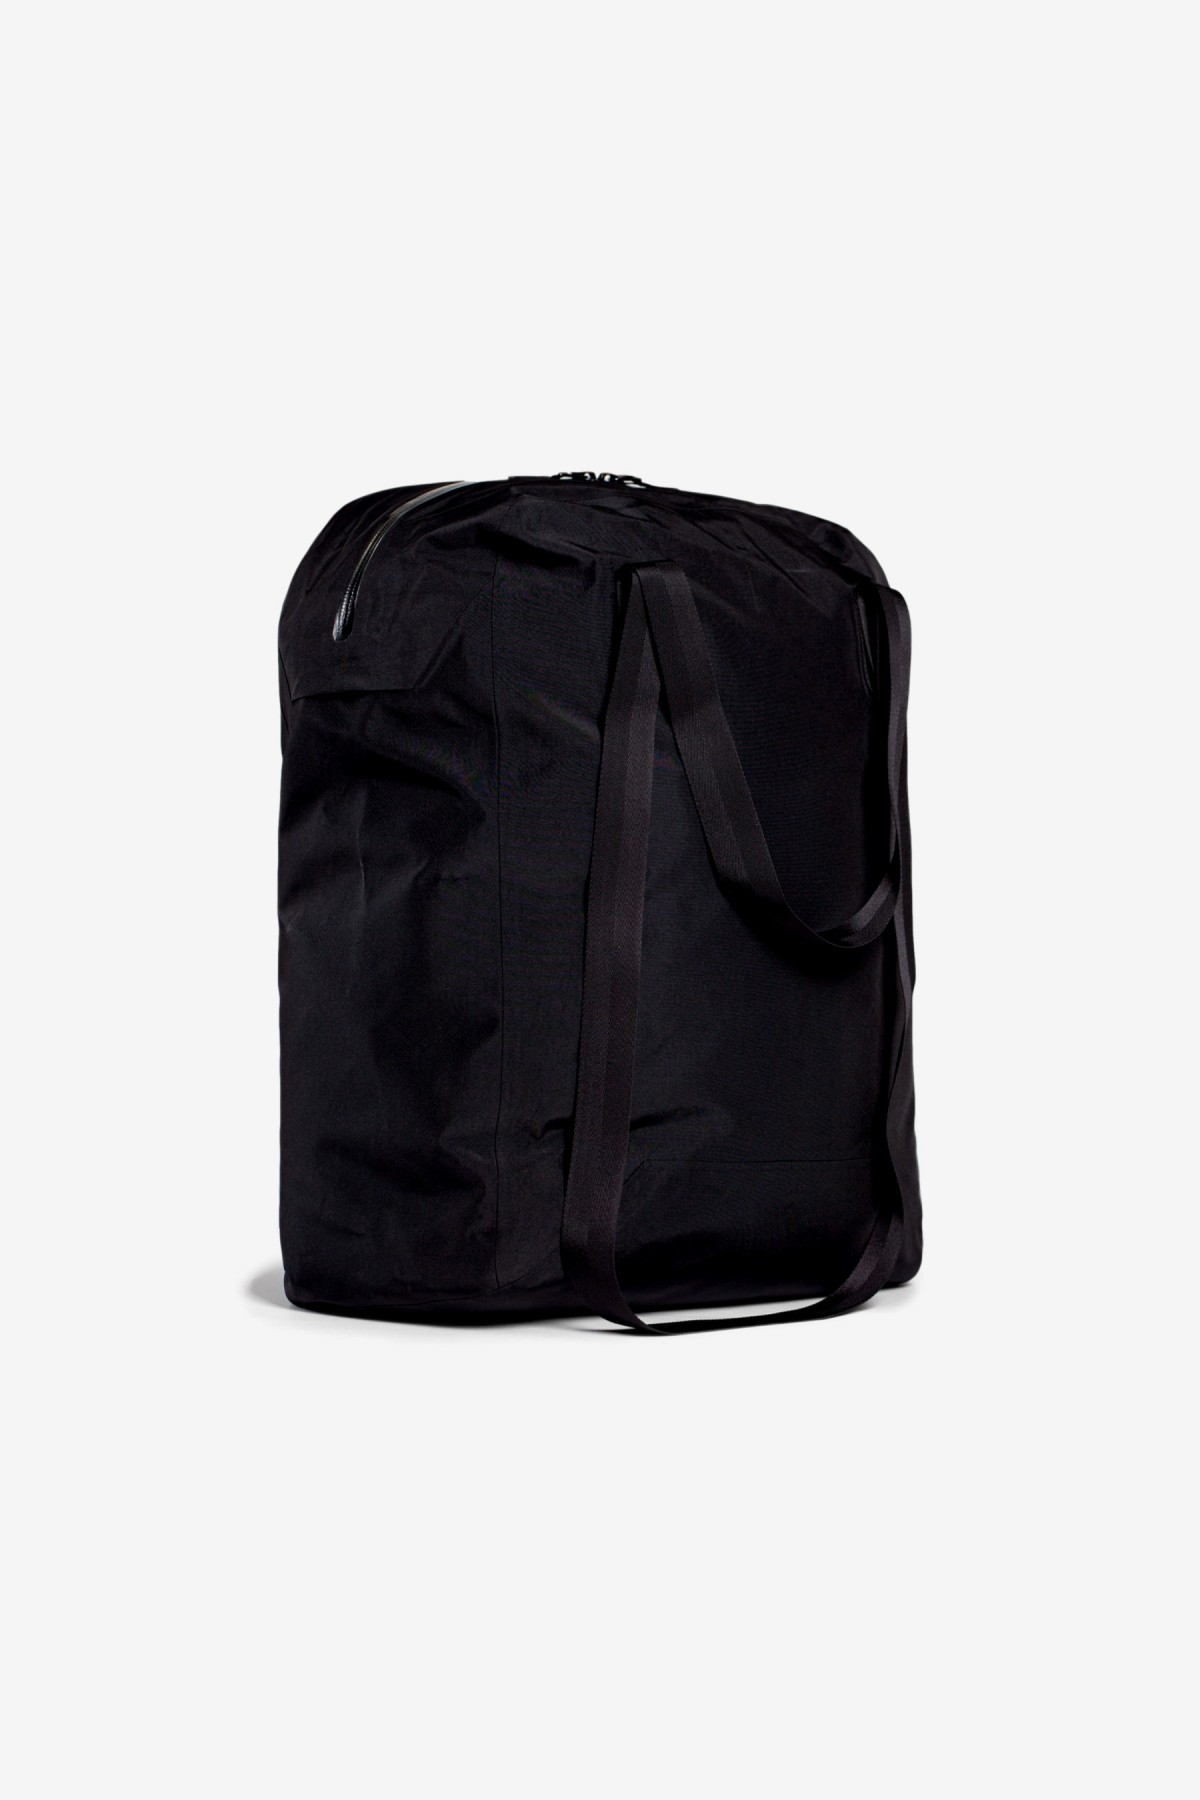 Arc’teryx Veilance Seque Re-System Tote in Black